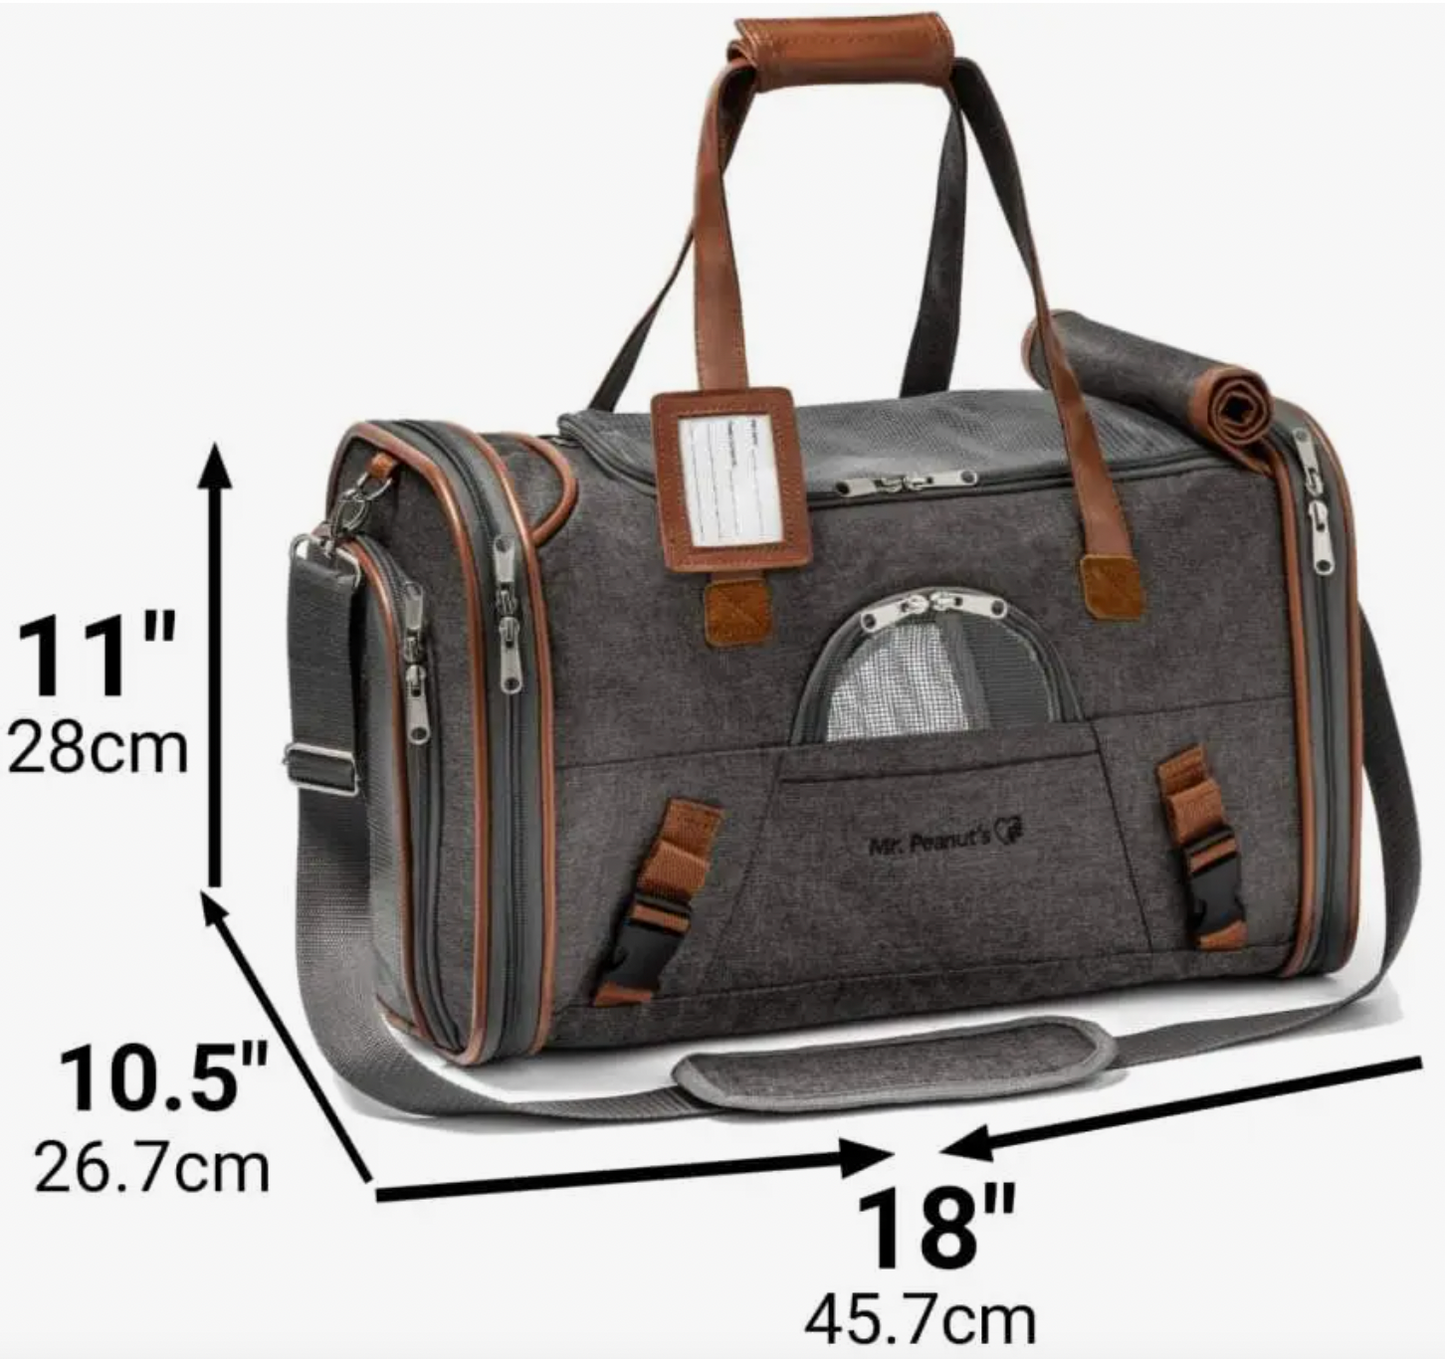 MR PEANUTS Gold Series Airline Capable Pet Carrier, Charcoal Ash